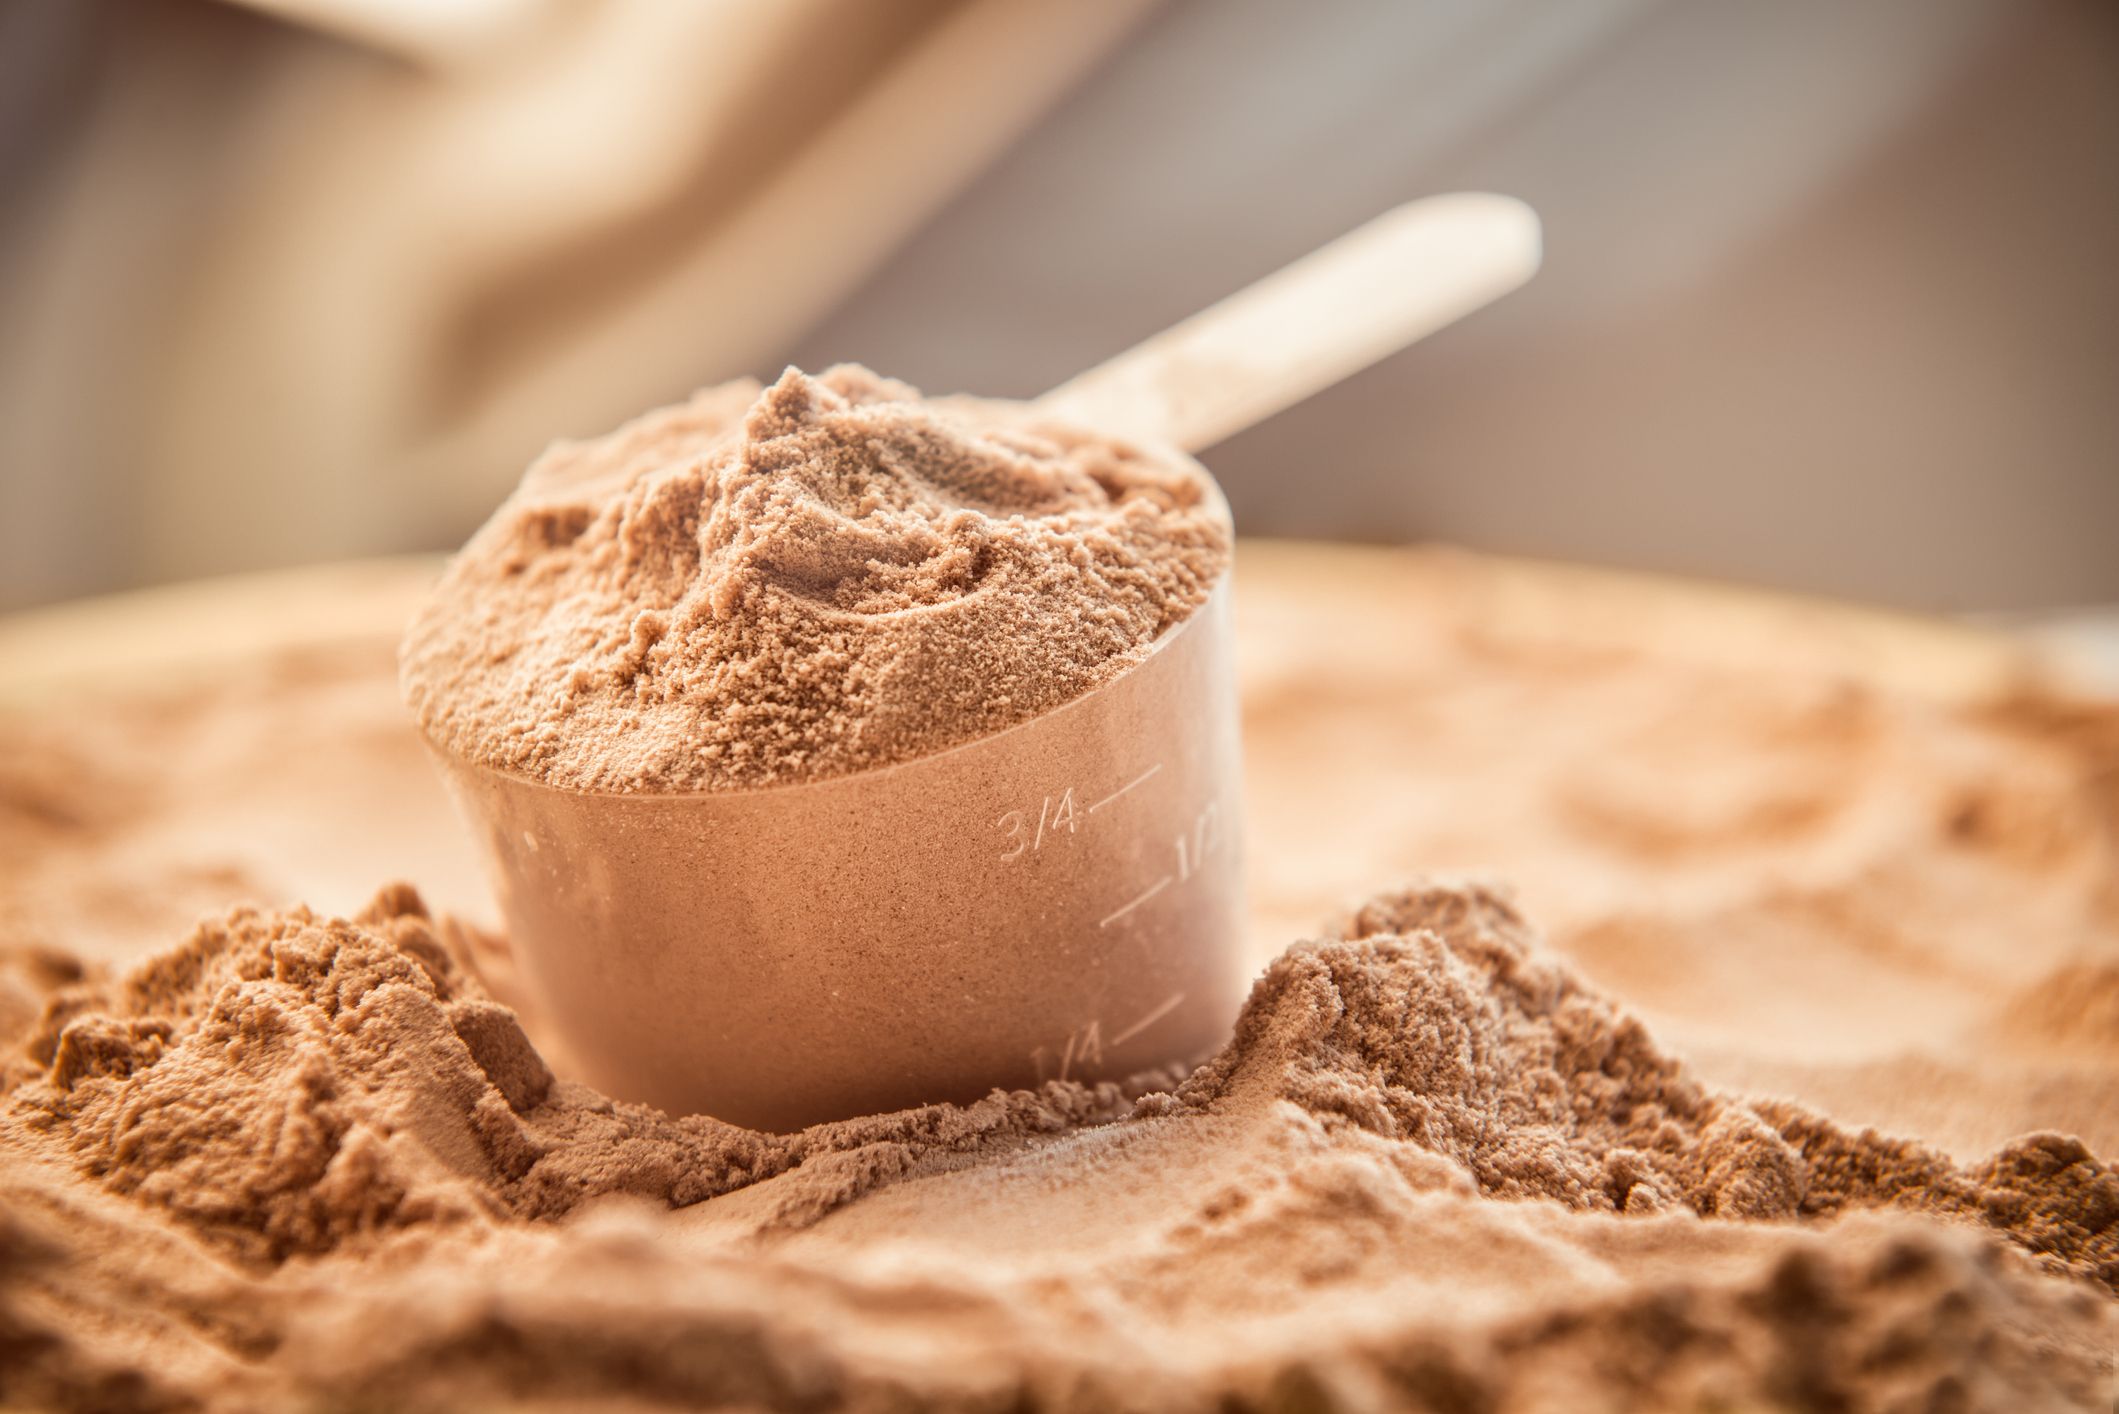 12 Best Protein Powders for Weight Loss in 2020, Per Dietitians